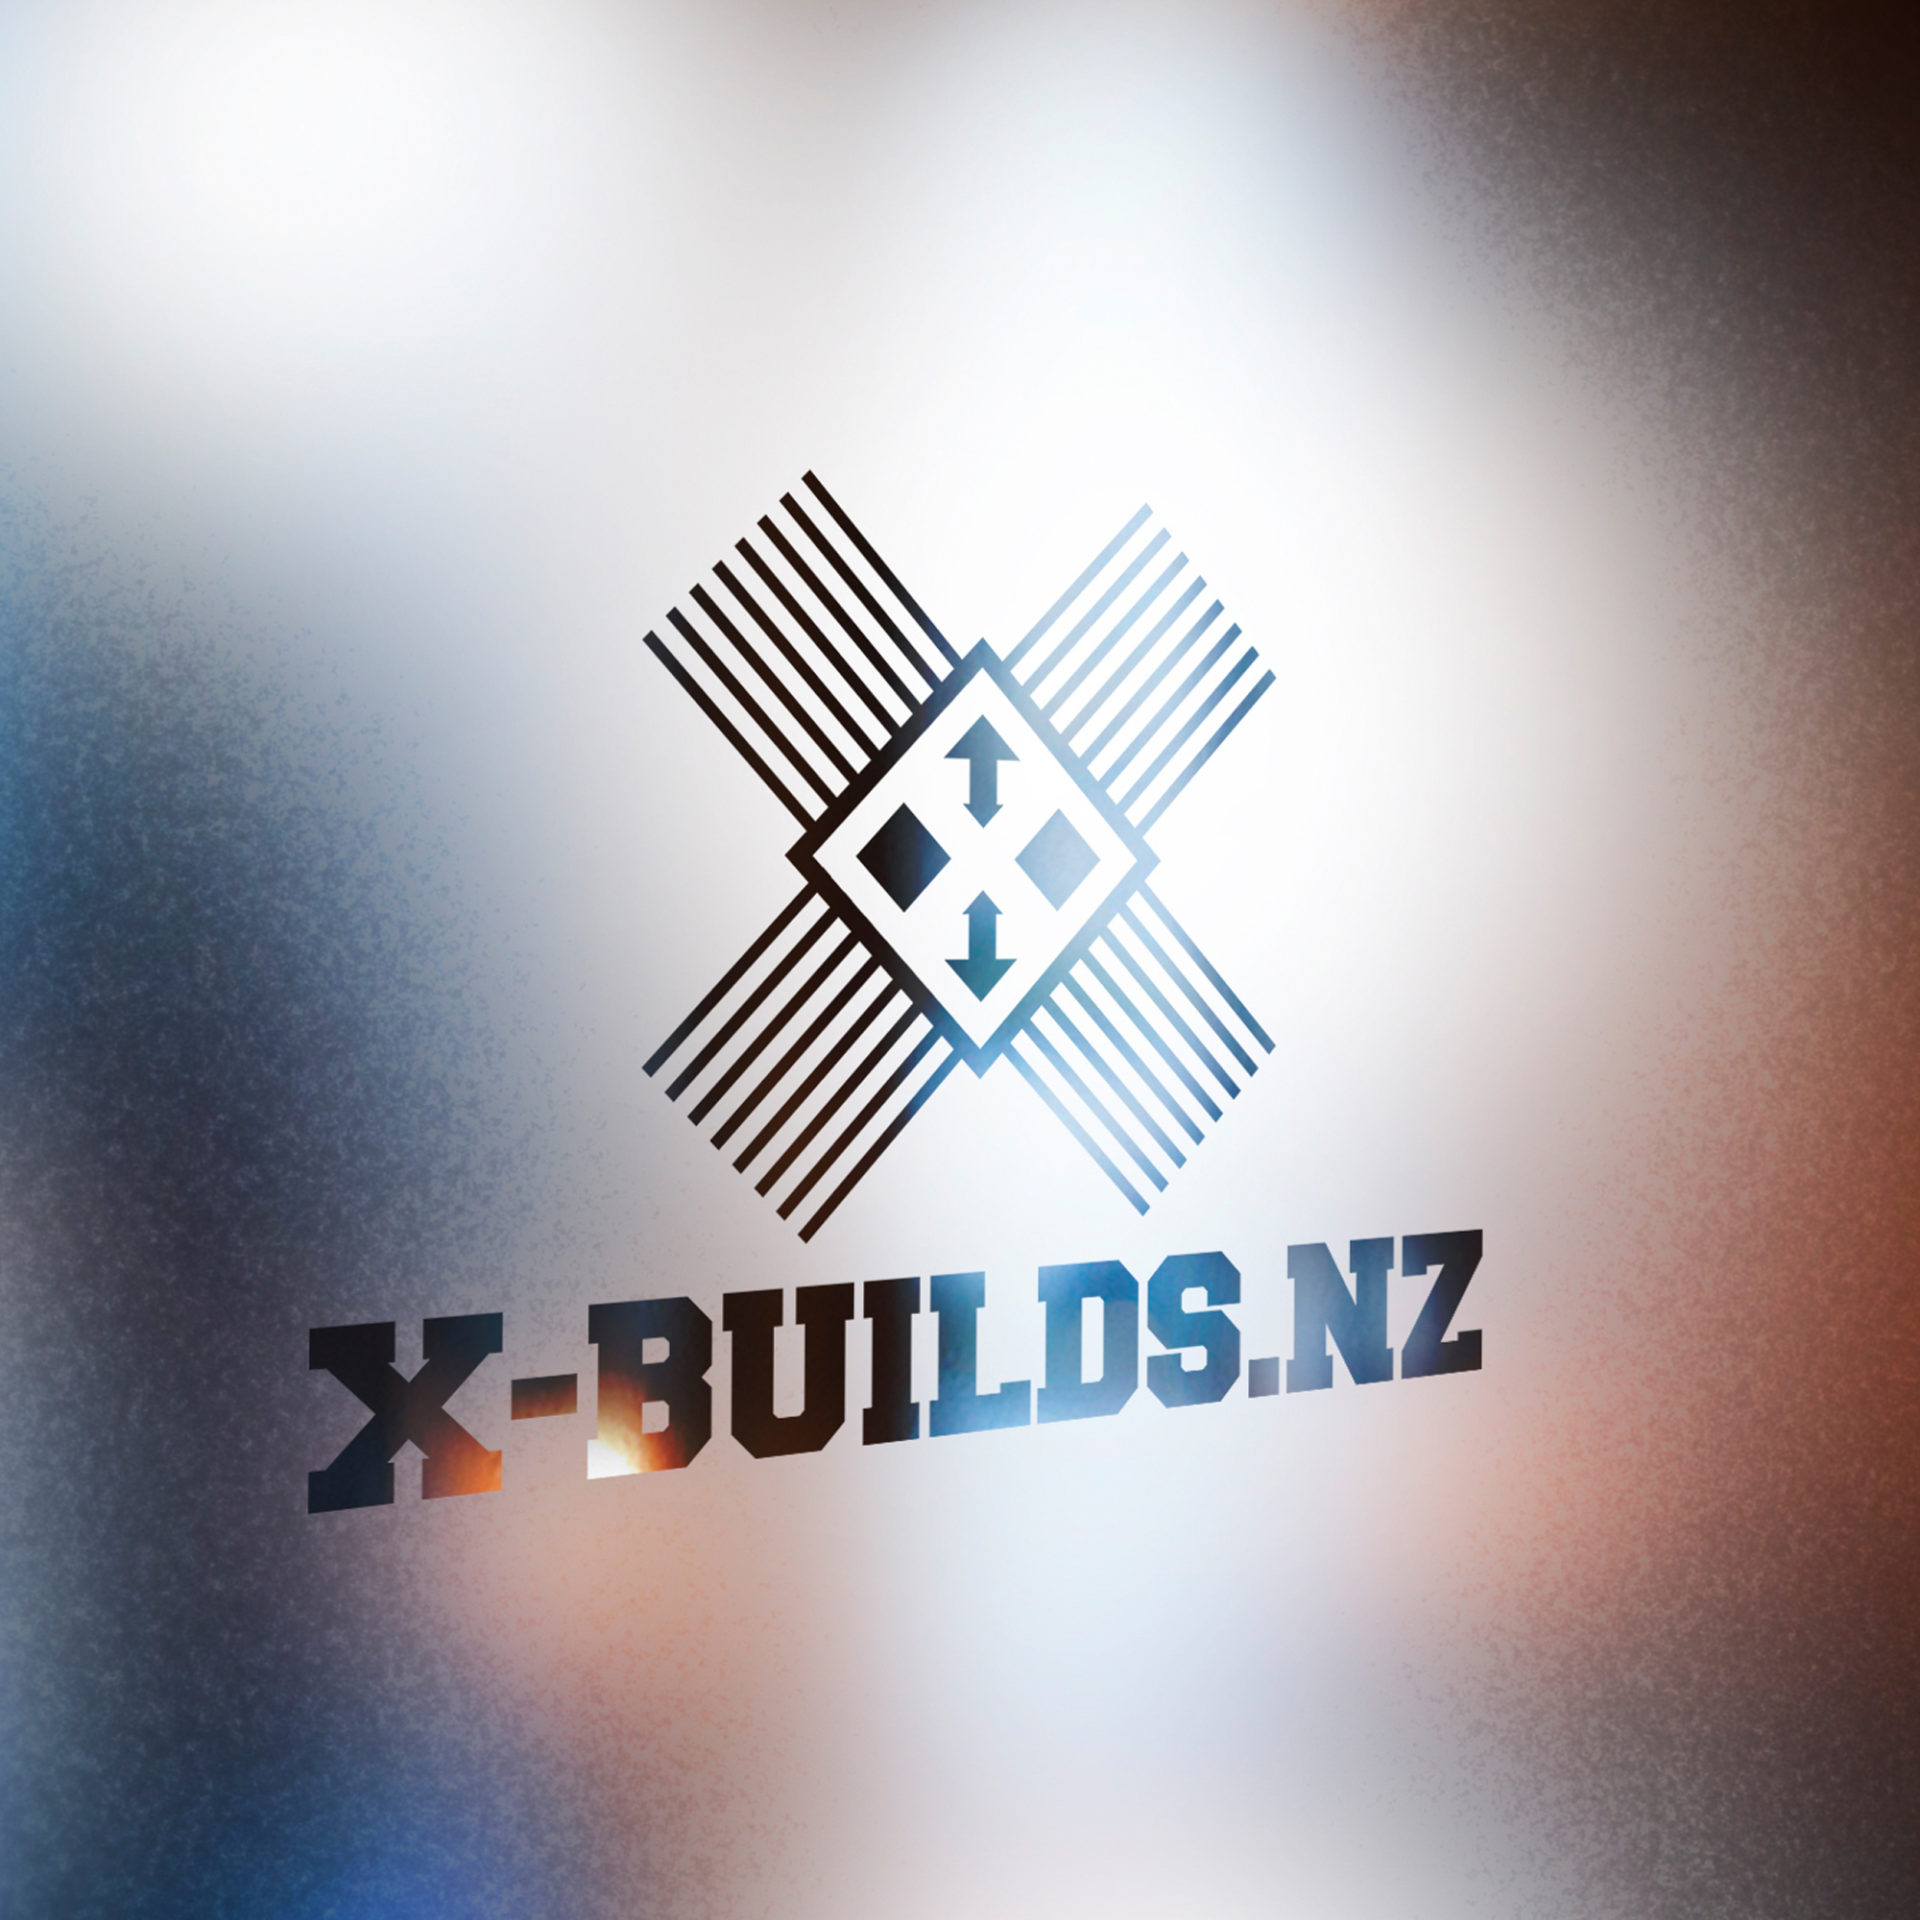 Logo Making made easy for X-Builds an established local workstation computer / gaming pc solutions business based in Selwyn, Canterbury, NZ. A modern tech-like friendly mechanical but old school styled electricity meter dial counter Logo Design made by XDC.NZ, the super experienced, professional, specialist Logo Designer or Logo Maker based in Christchurch & Rolleston Selwyn NZ (without the hefty Ad-Agency price tag). Call Clint now on 021 11 44 014 for a free quote. The best Logo Designer near me! This is X Builds's Logo and branded website designs & website graphics.